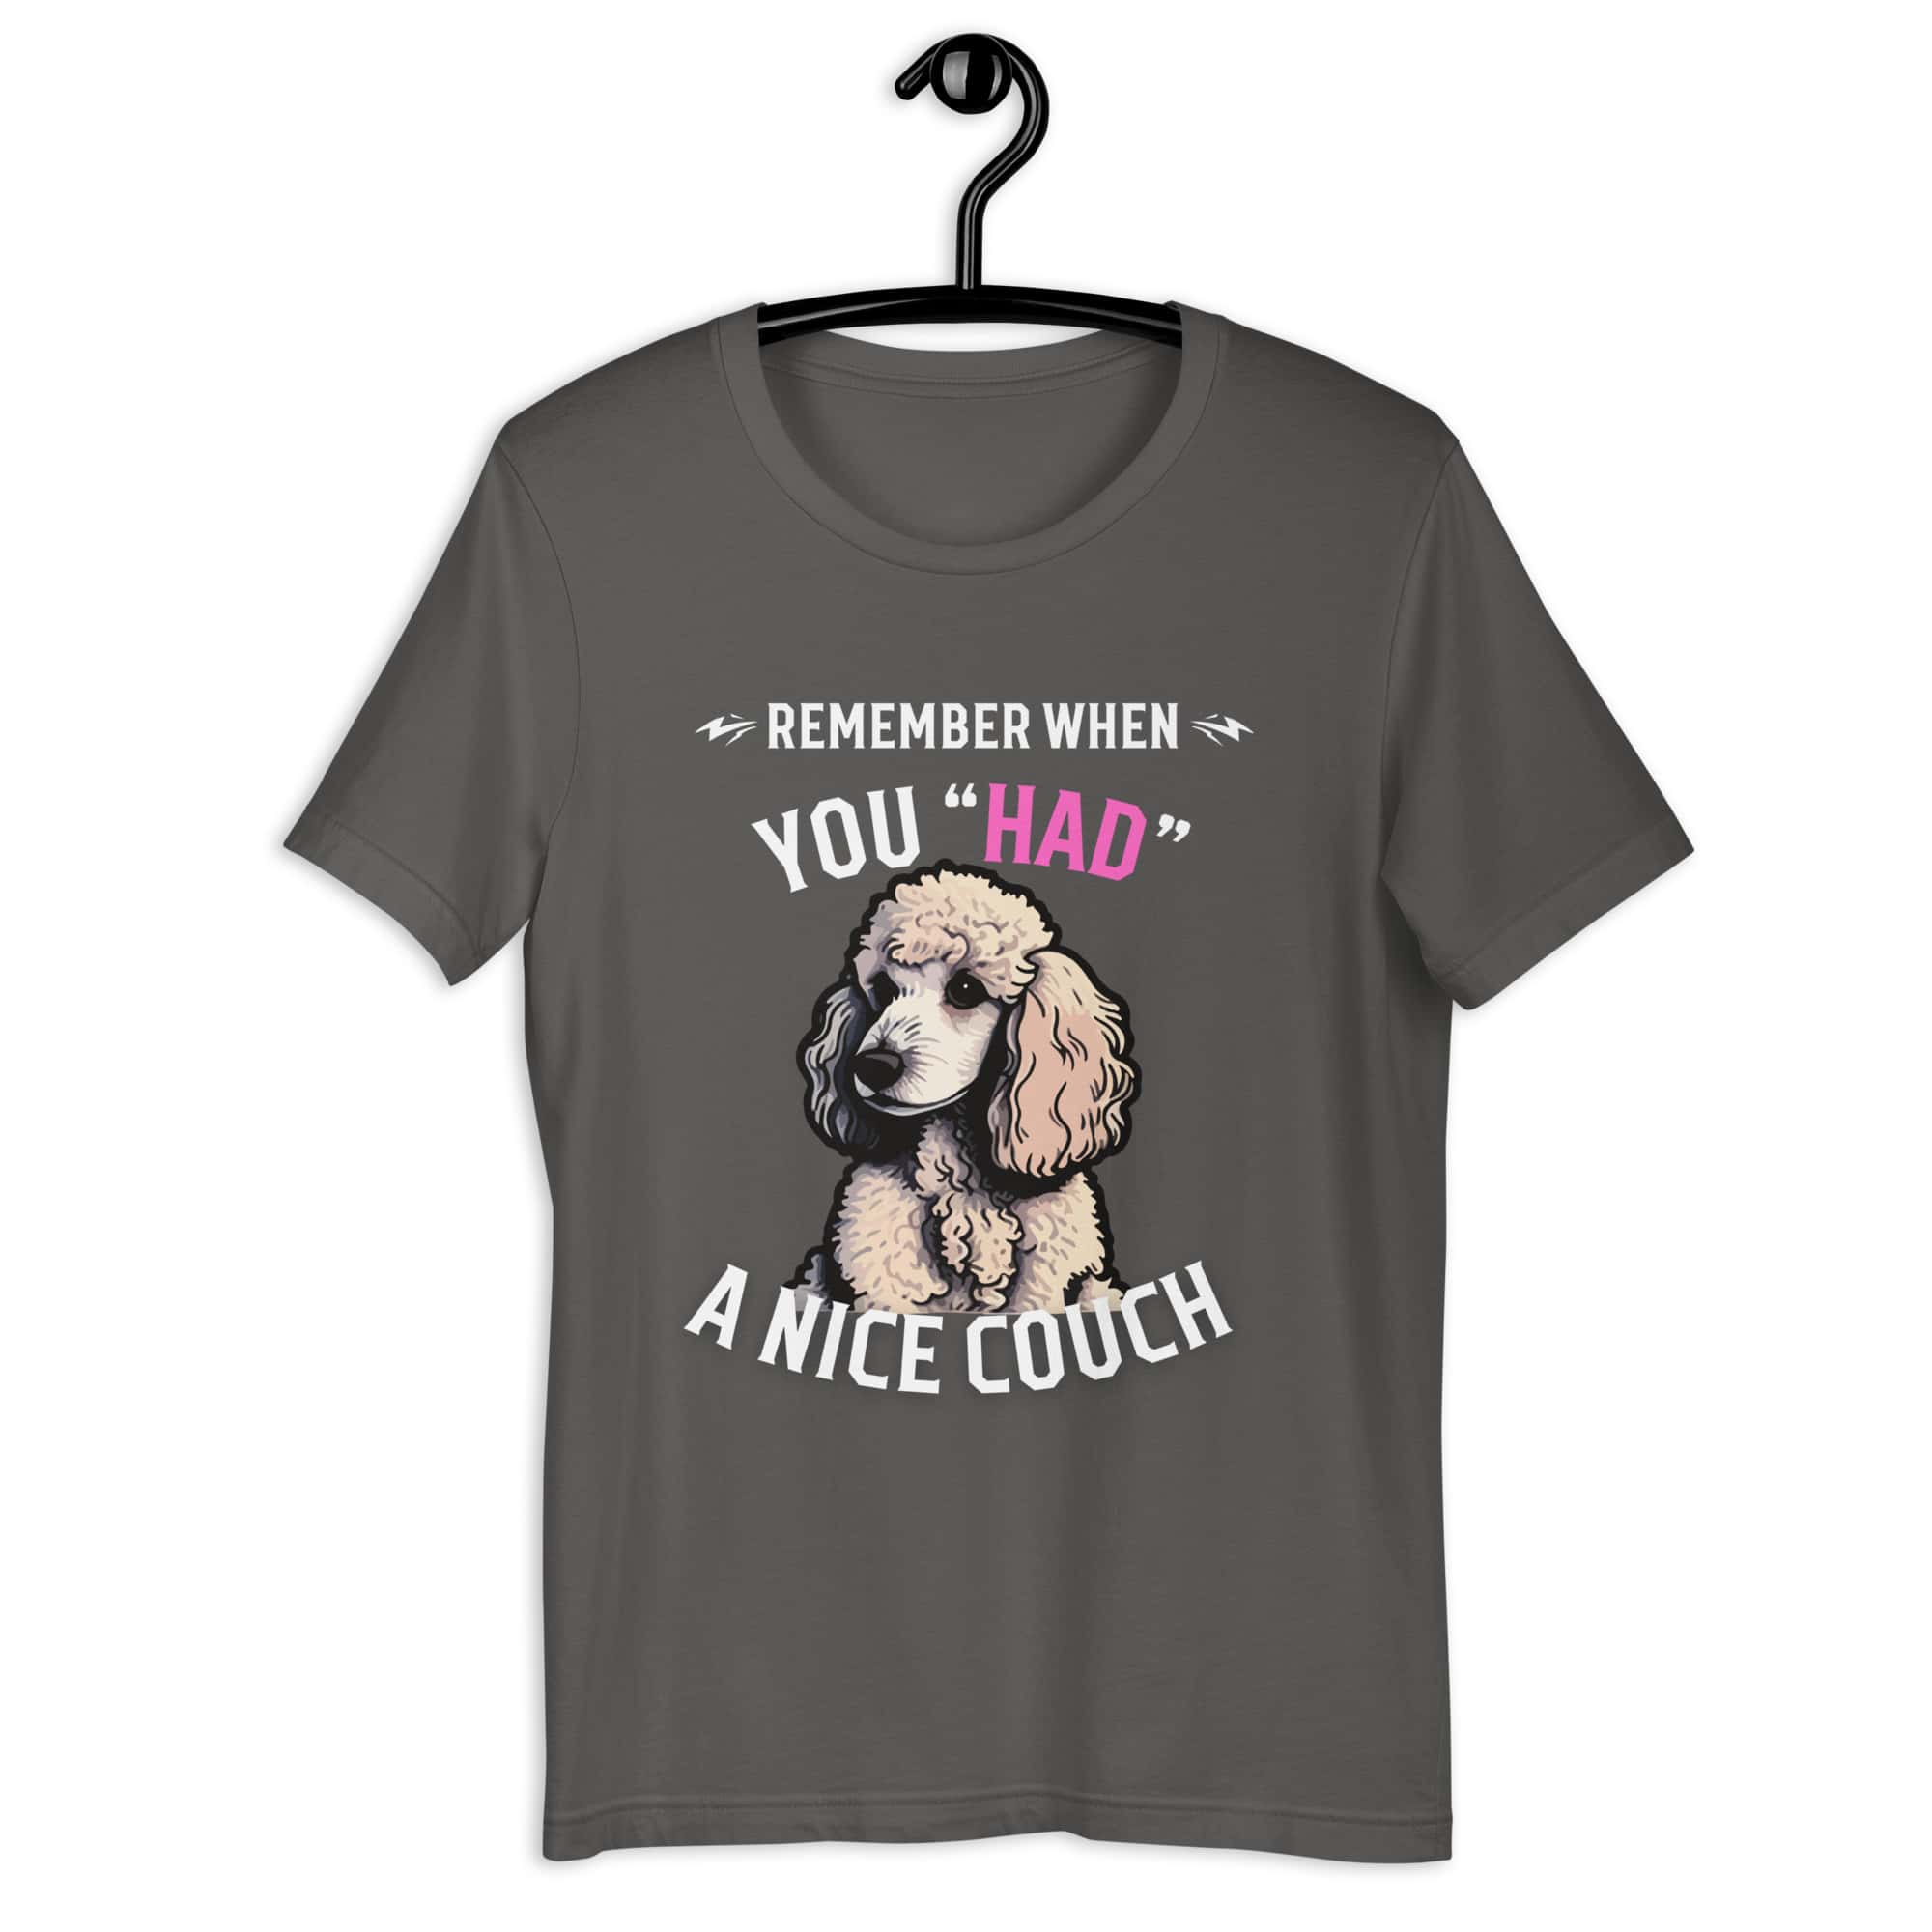 "Remember When You Had A Nice Couch" Funny Poodle Unisex T-Shirt gray